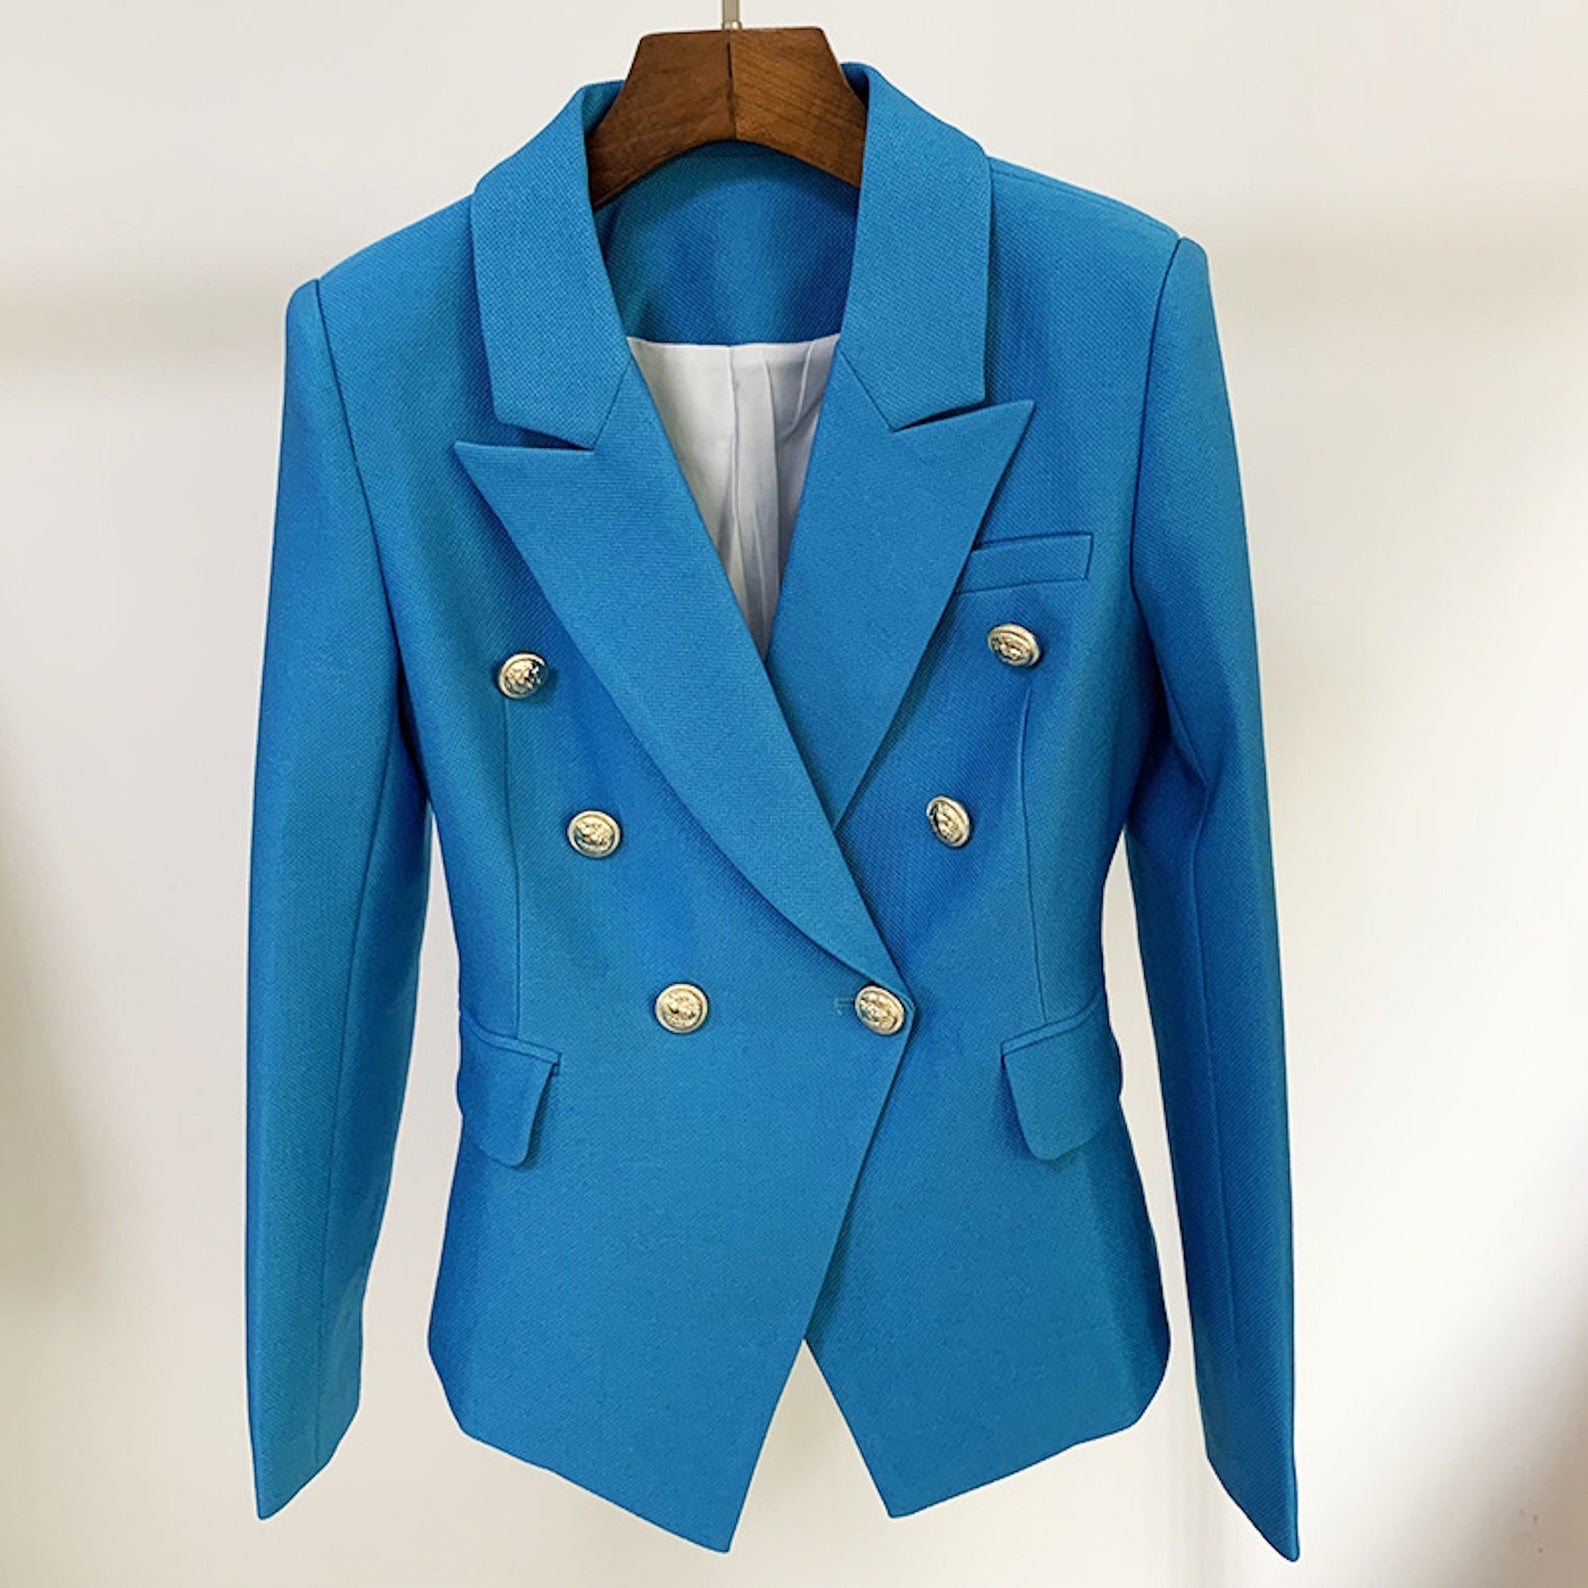 Women's Fitted Blazer Golden Lion Buttons Coat Blue UK CUSTOMER SERVICE! Women's Fitted Blazer Golden Lion Buttons Coat Blue- can worn for business meeting, daily wear, formal date, office work, vacation and outdoor activities. Classic fashion design, the simple and comfort can accentuate the neck line.  Polyester Fastening: Button Slim Long Sleeve